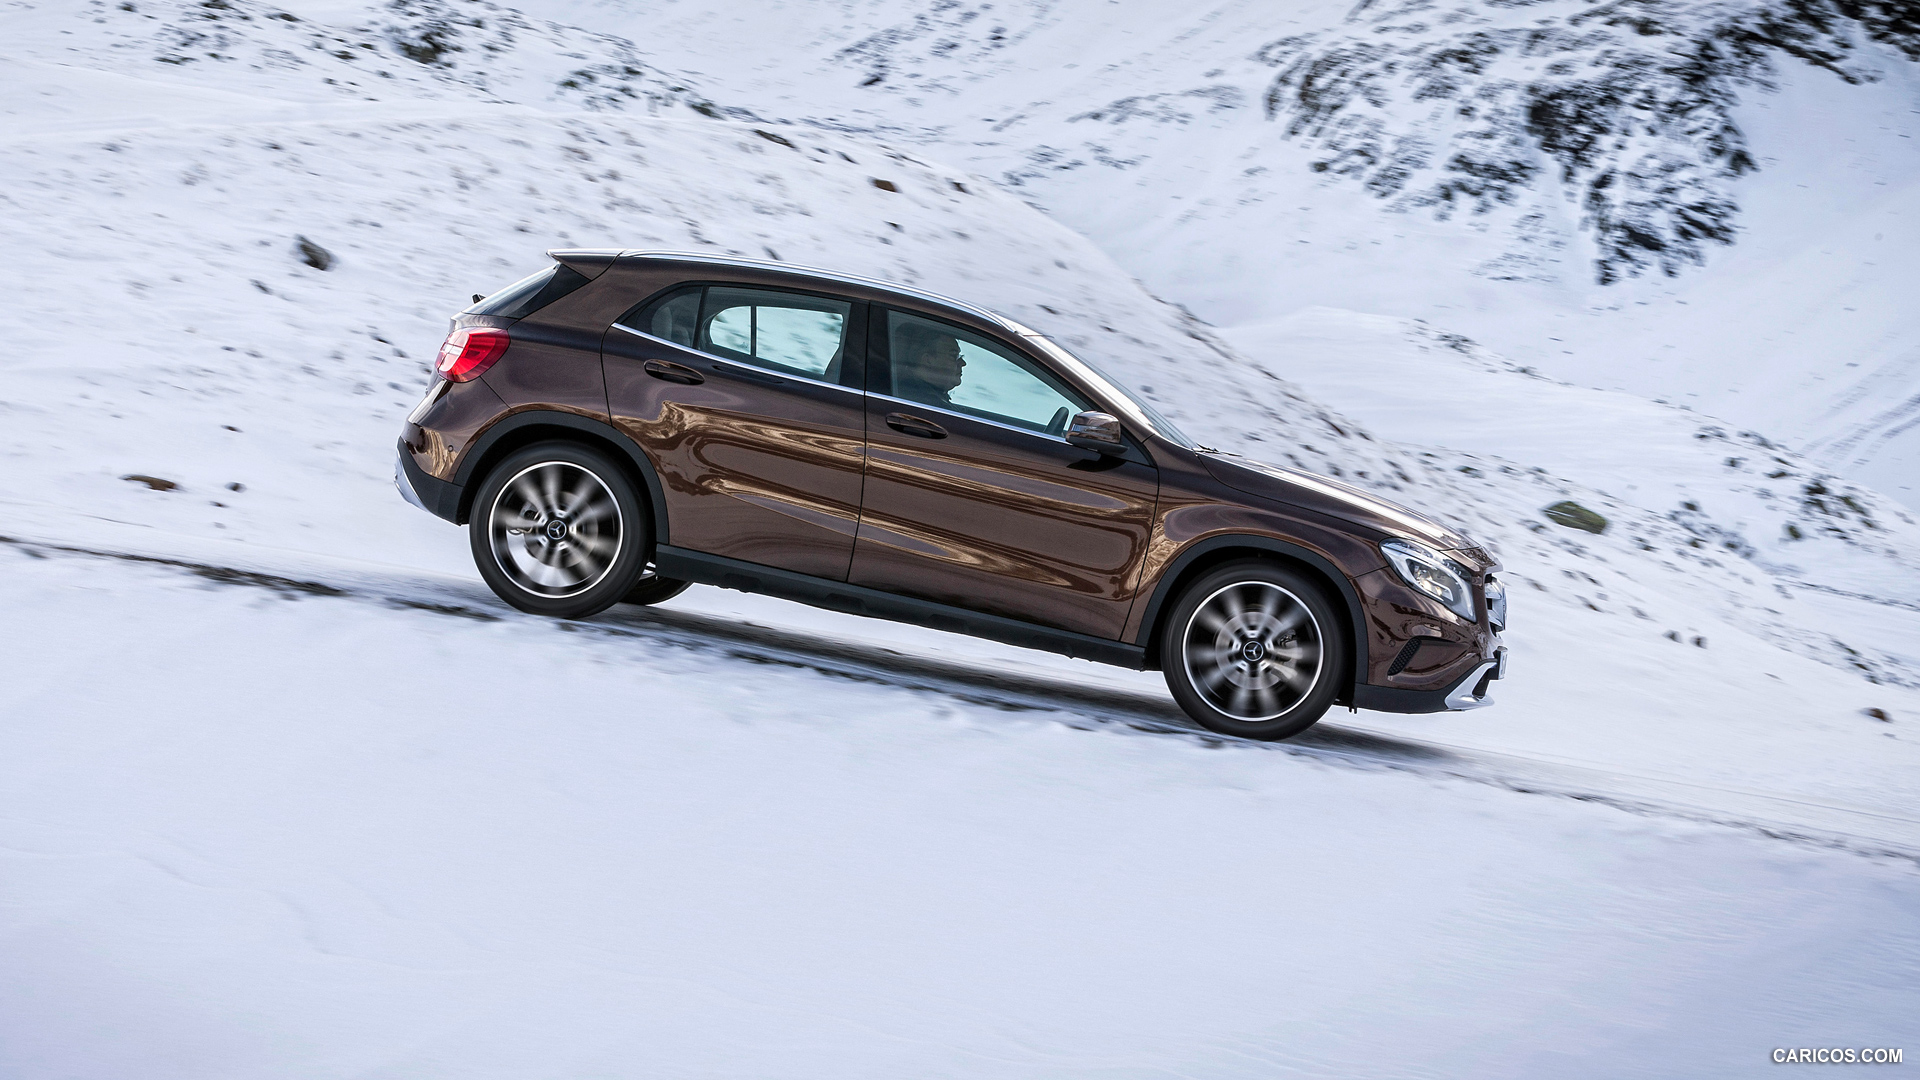 2015 Mercedes-Benz GLA 220 CDI 4MATIC - In Snow - Side, #61 of 71